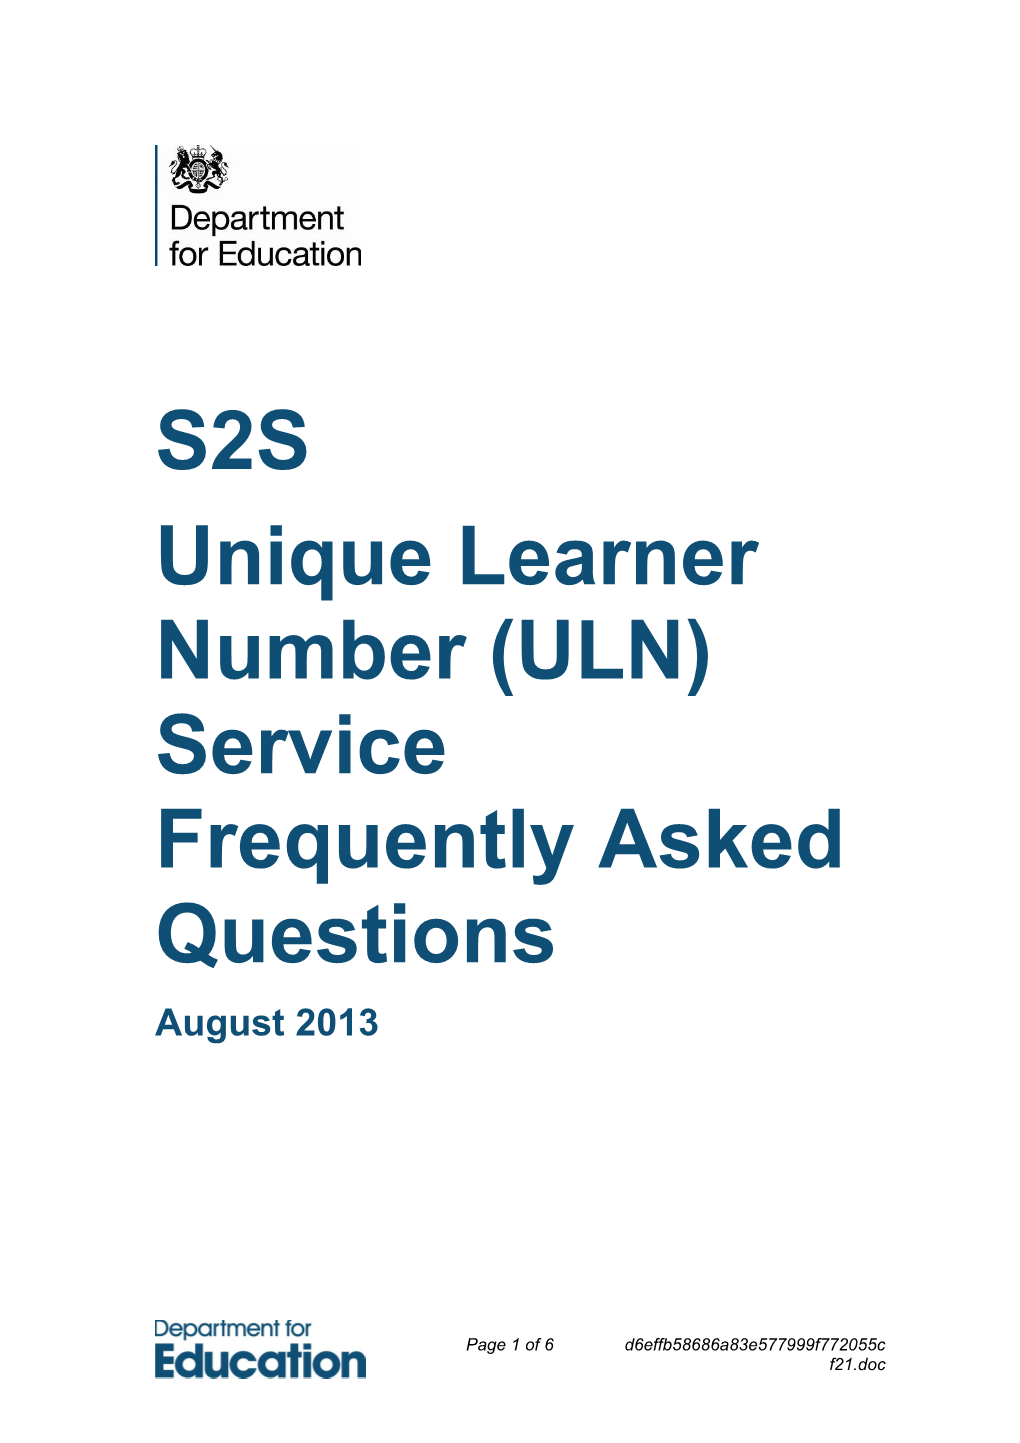 Unique Learner Number (ULN) Service Frequently Asked Questions